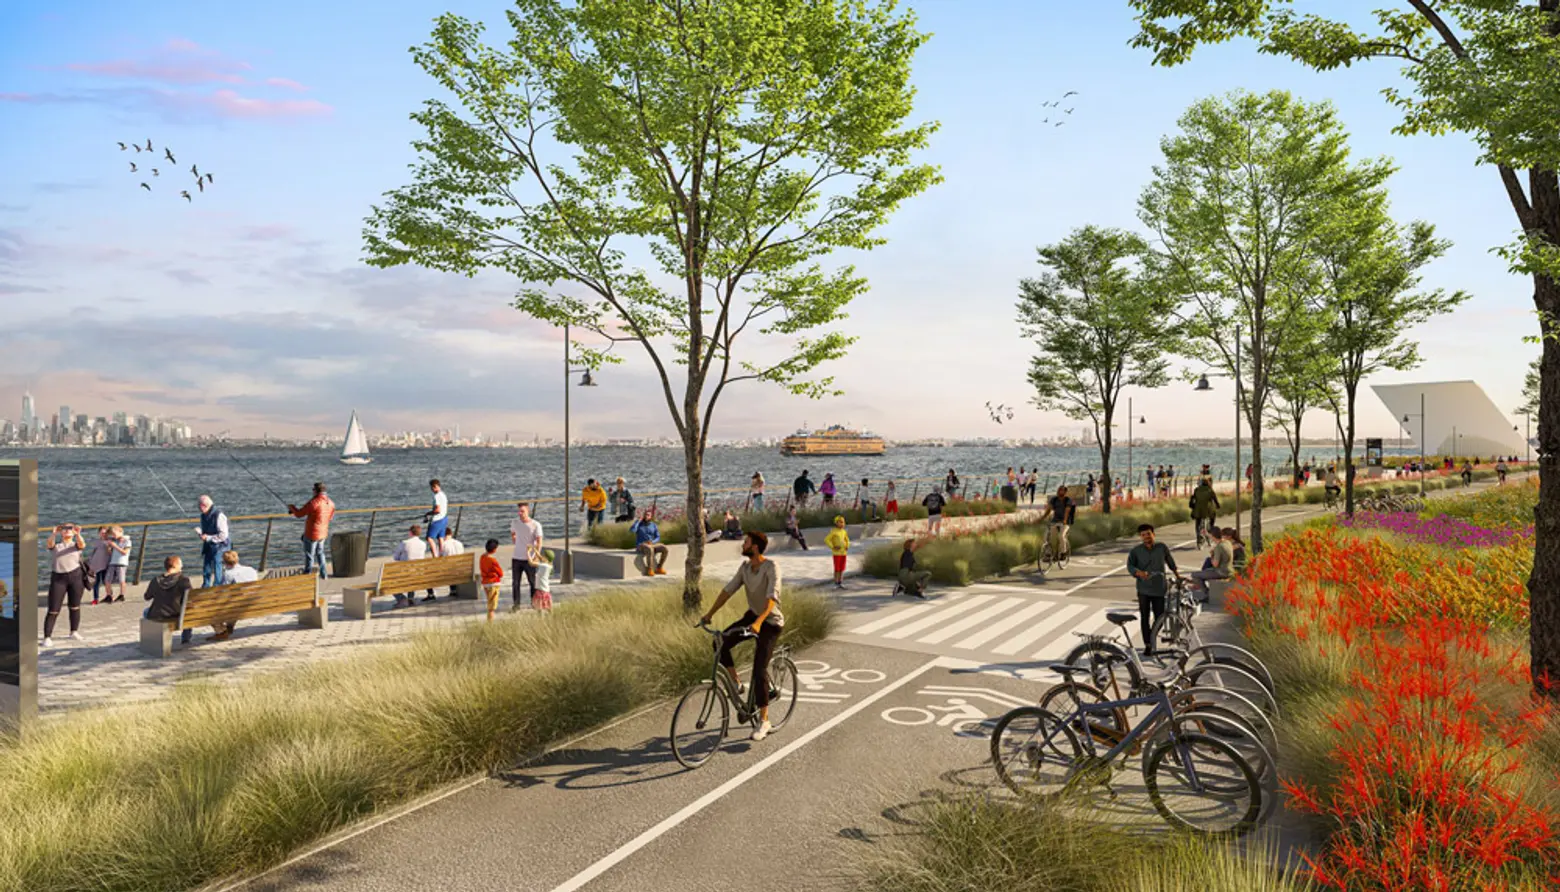 Plan to revitalize Staten Island’s North Shore includes 2,400 homes and waterfront esplanade